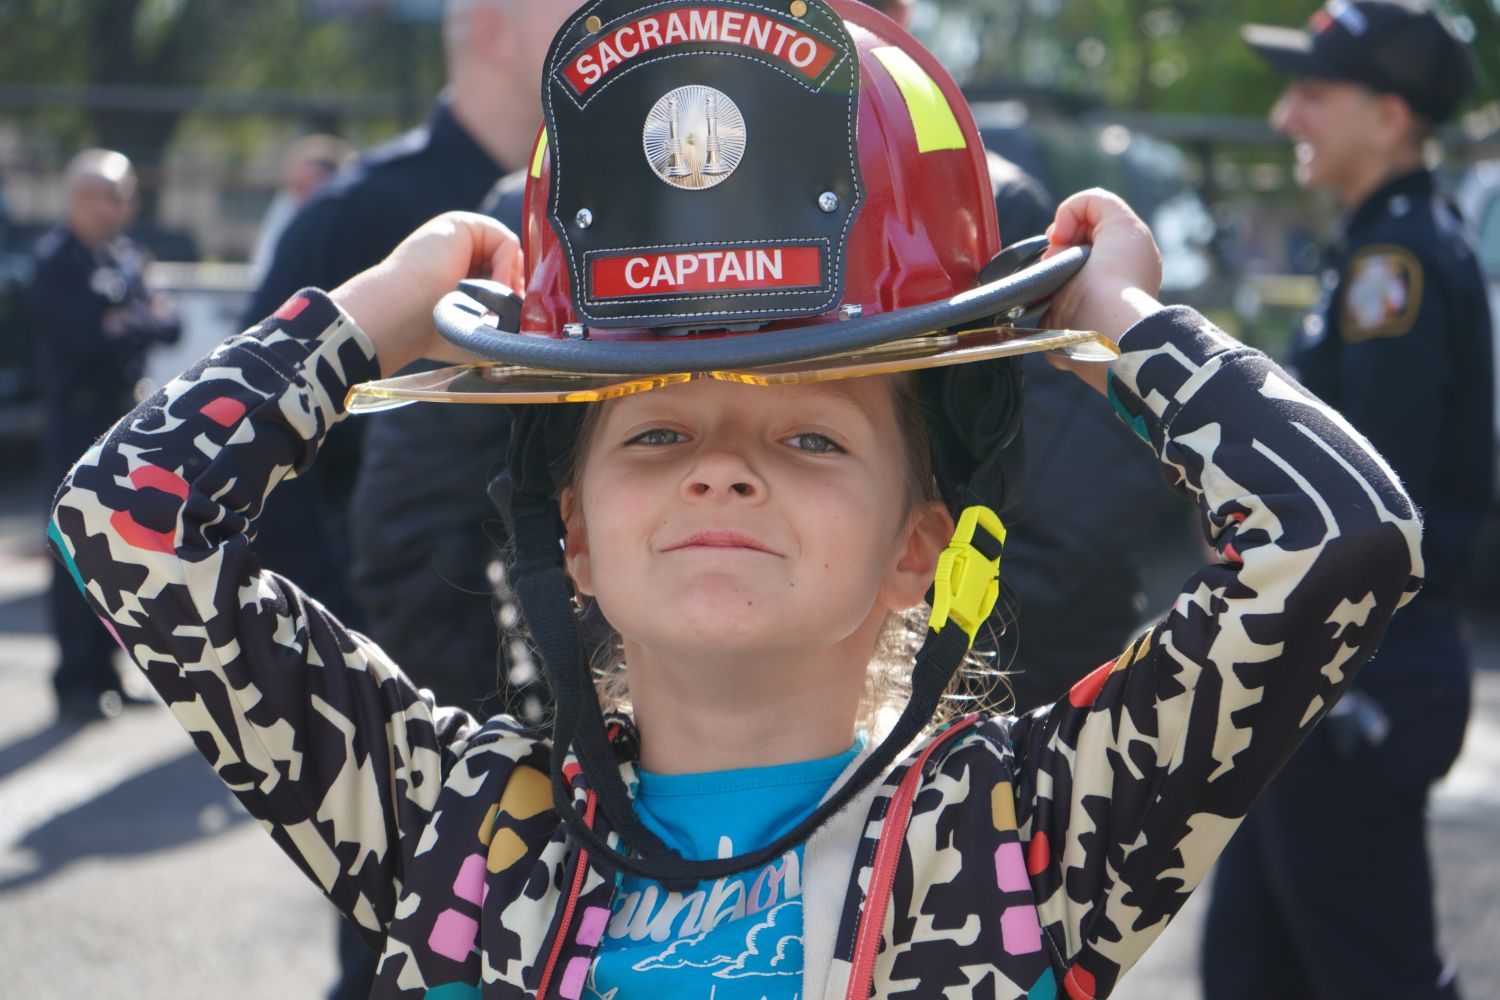 A YOUNG KID IN A COLORFUL SWEATER TRYING ON A FIRE CAPTAIN HELMET